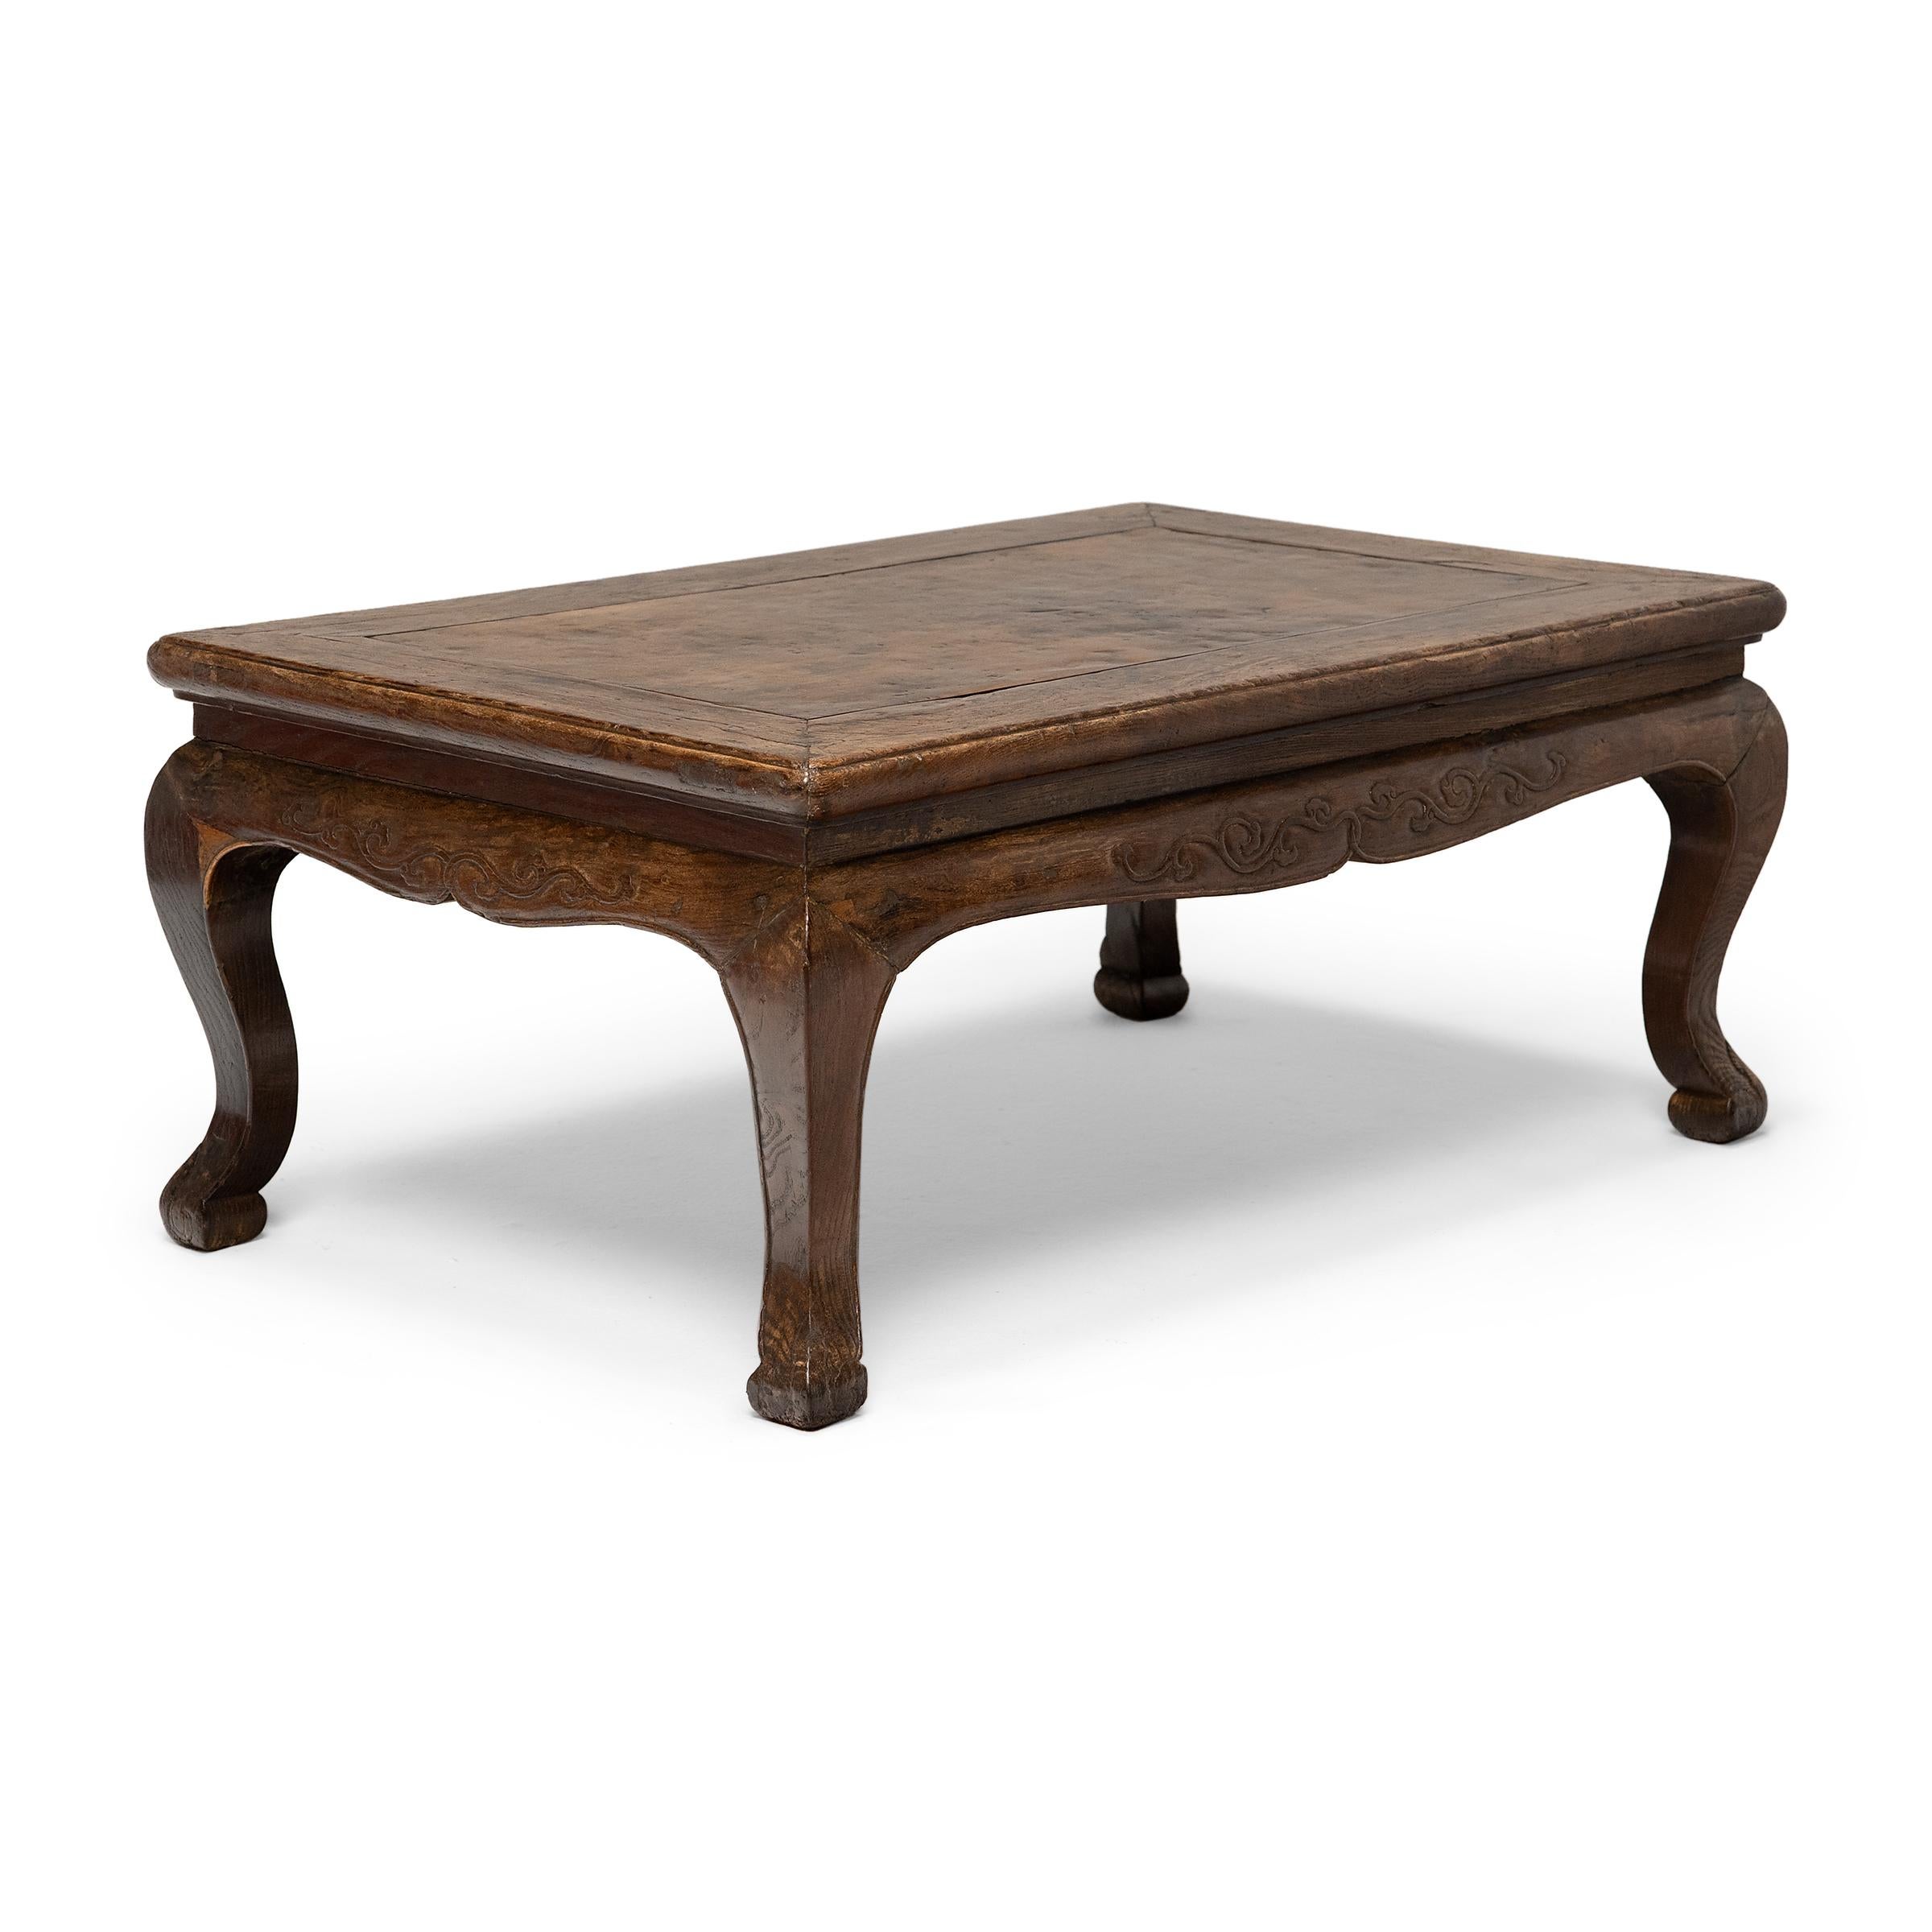 Chinese Low Burl Top Kang Table, c. 1850 In Good Condition For Sale In Chicago, IL